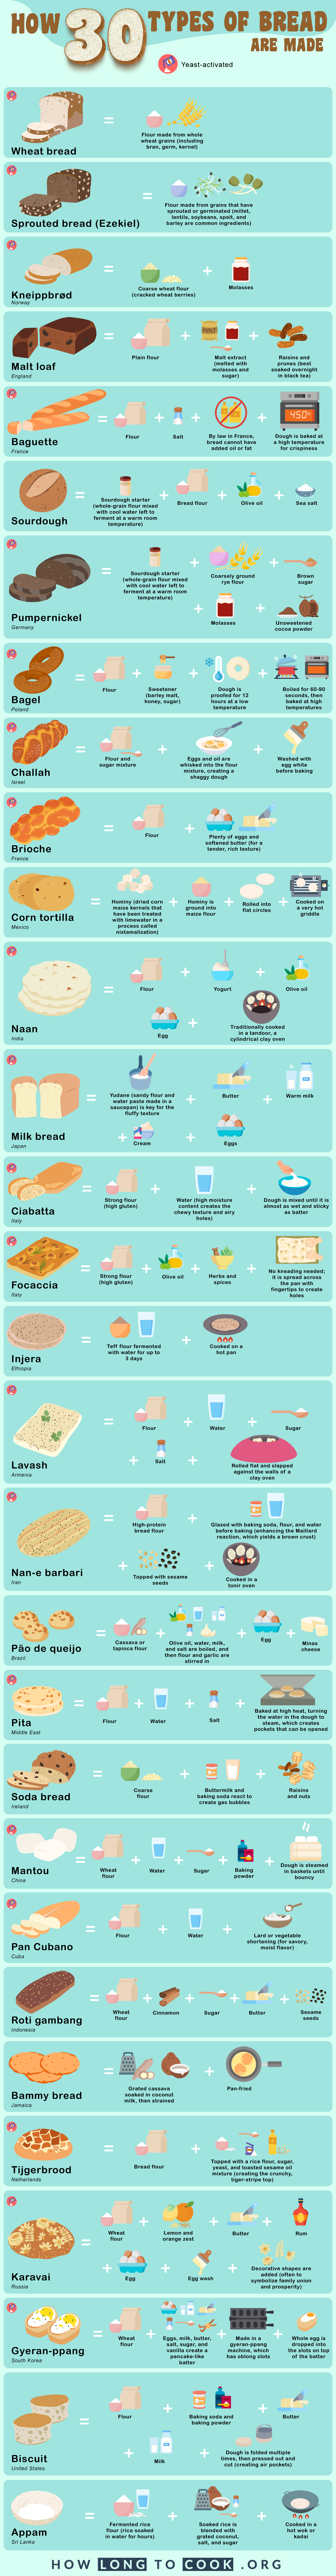 How 30 Types of Bread Are Made